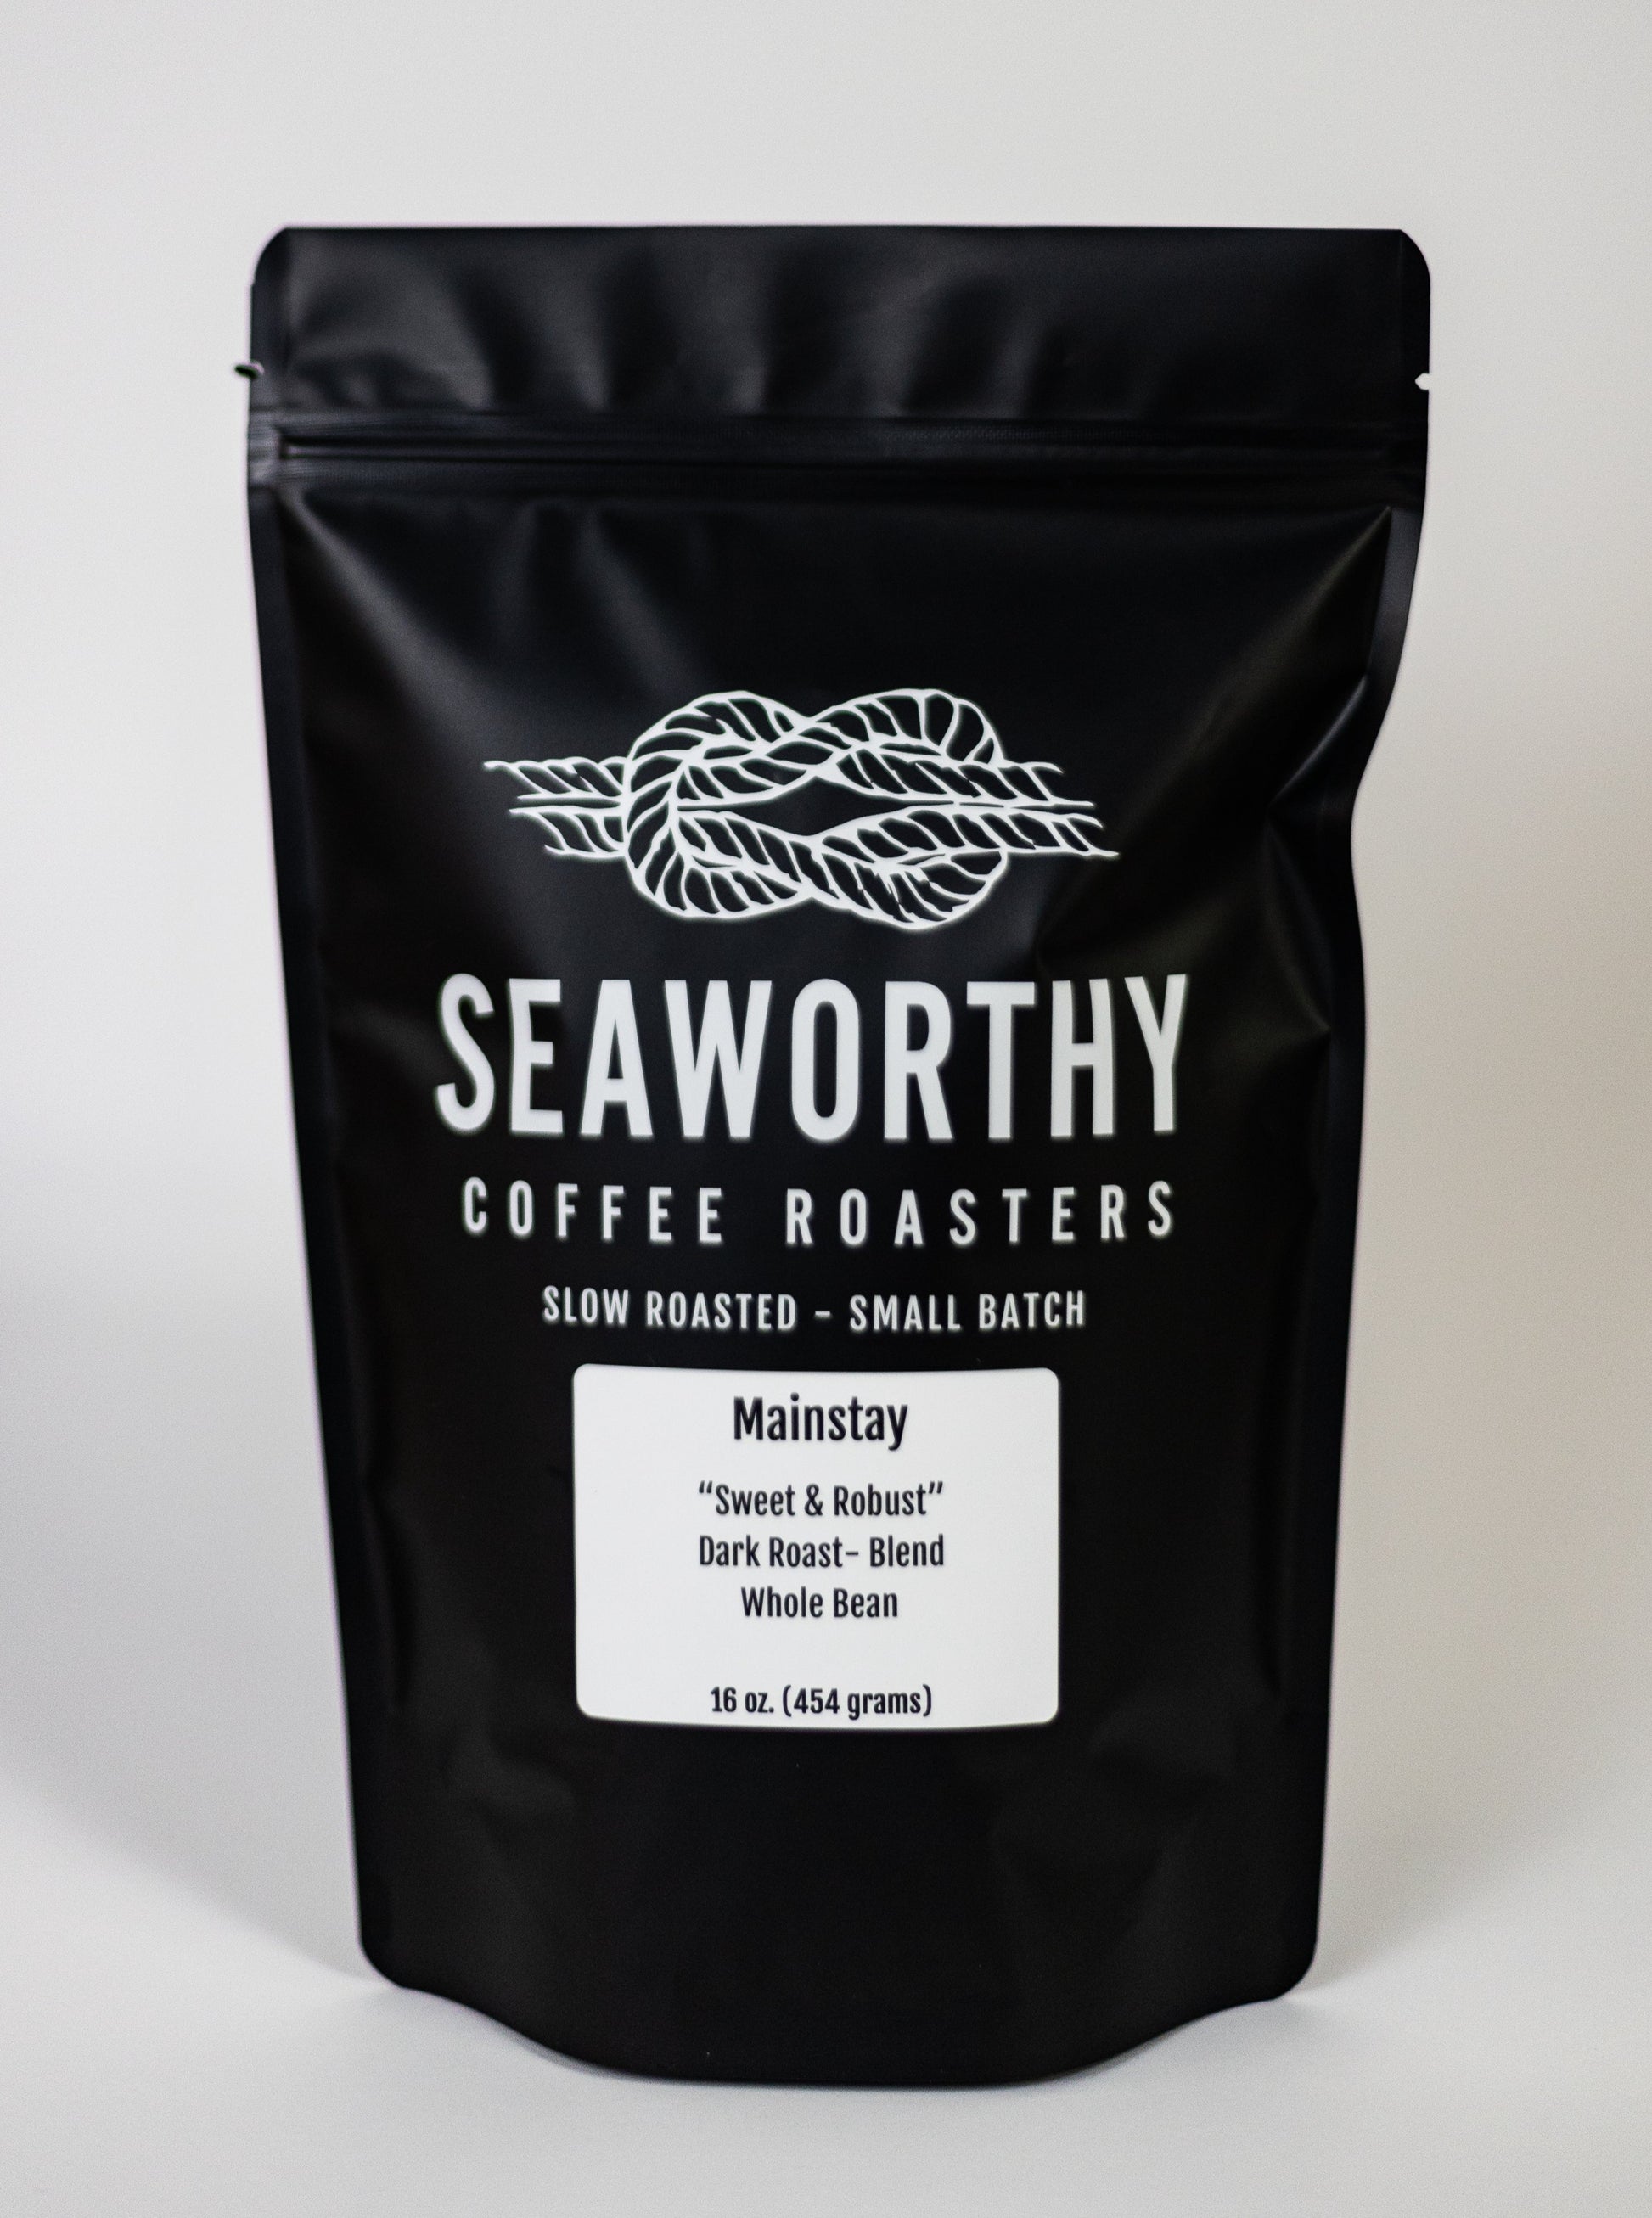 Seaworthy slow roasted, small batch coffee. On a ship, the mainstay serves as part of the rigging that helps to stabilize the main mast. The mainstay acts as the chief support and makes it possible for the ship to get underway, much like this flavorful roast will do for you. This rich blend boasts balanced sweet and bold flavor notes, with a medium body and low acidity.